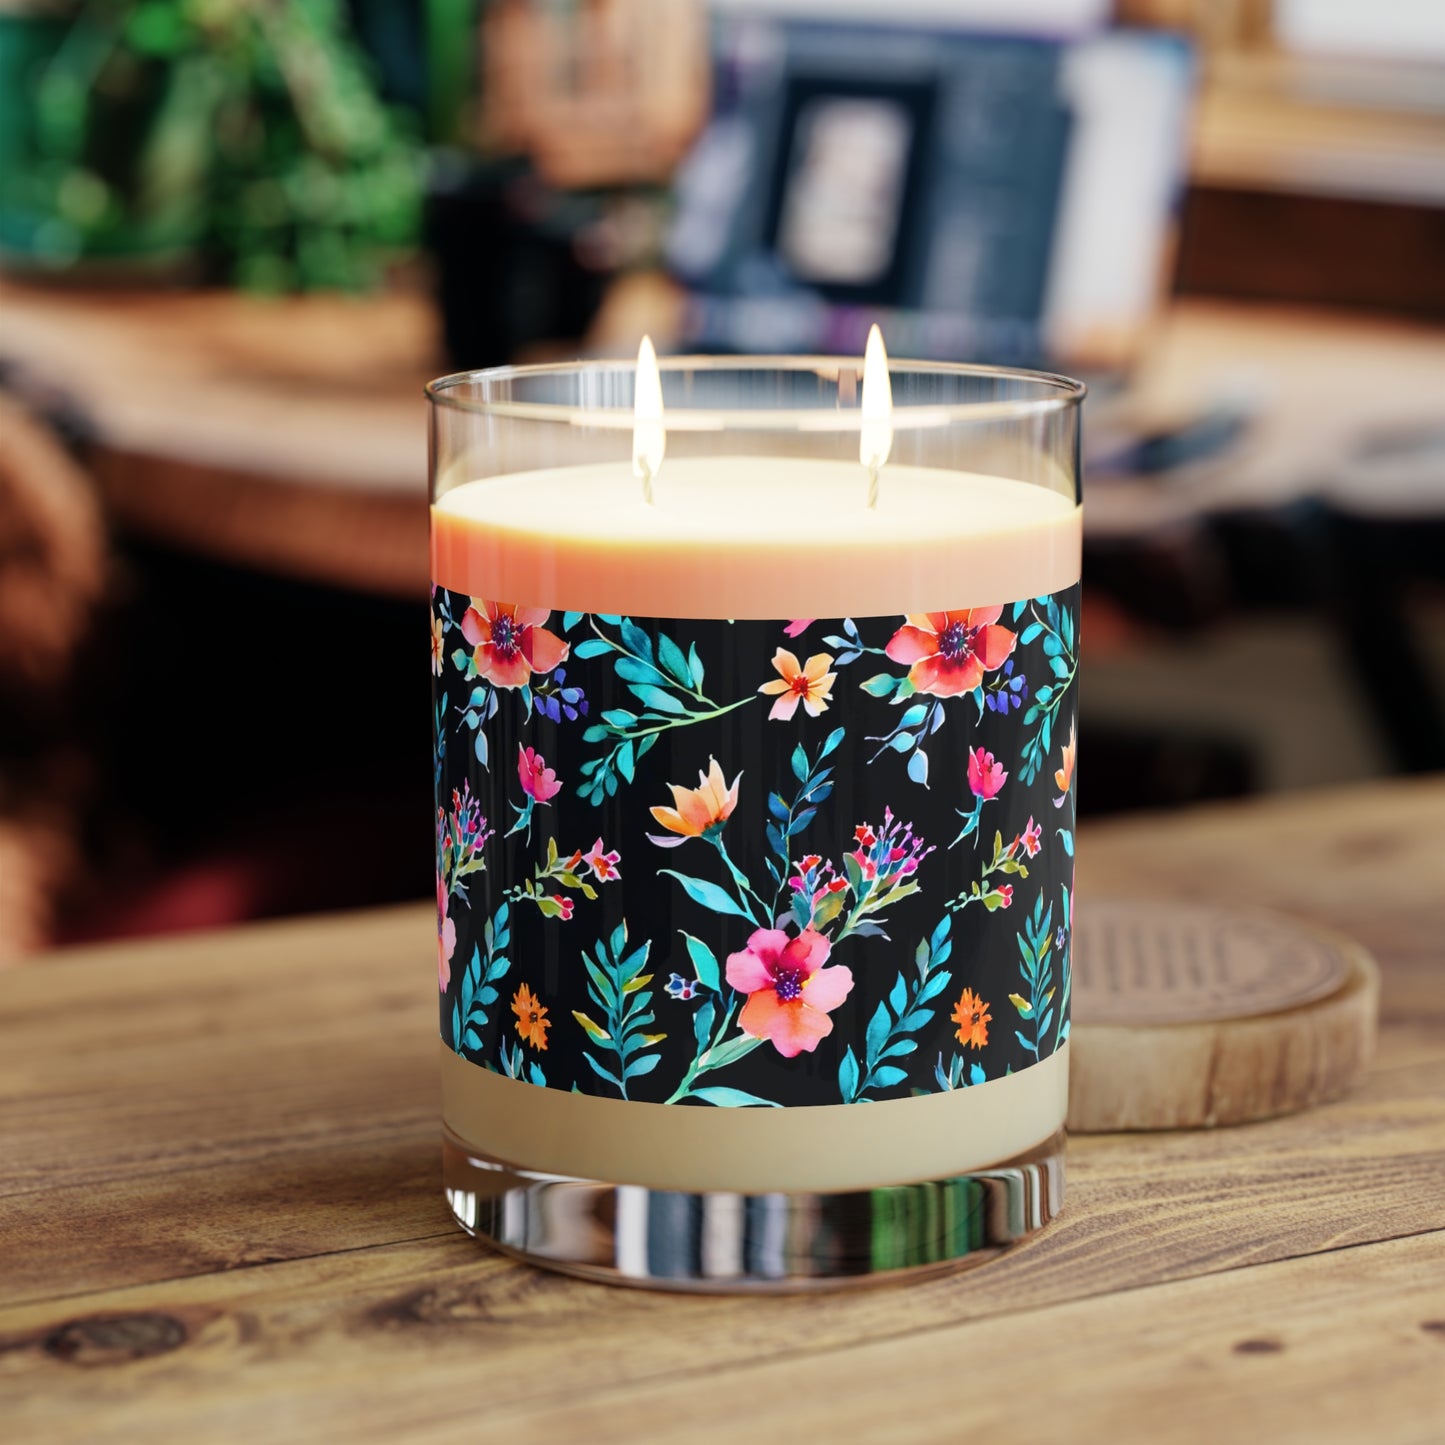 Midnight Floral II Watercolor Aromatherapy Essential Oils Natural Scented Candle - Full Glass, 11oz